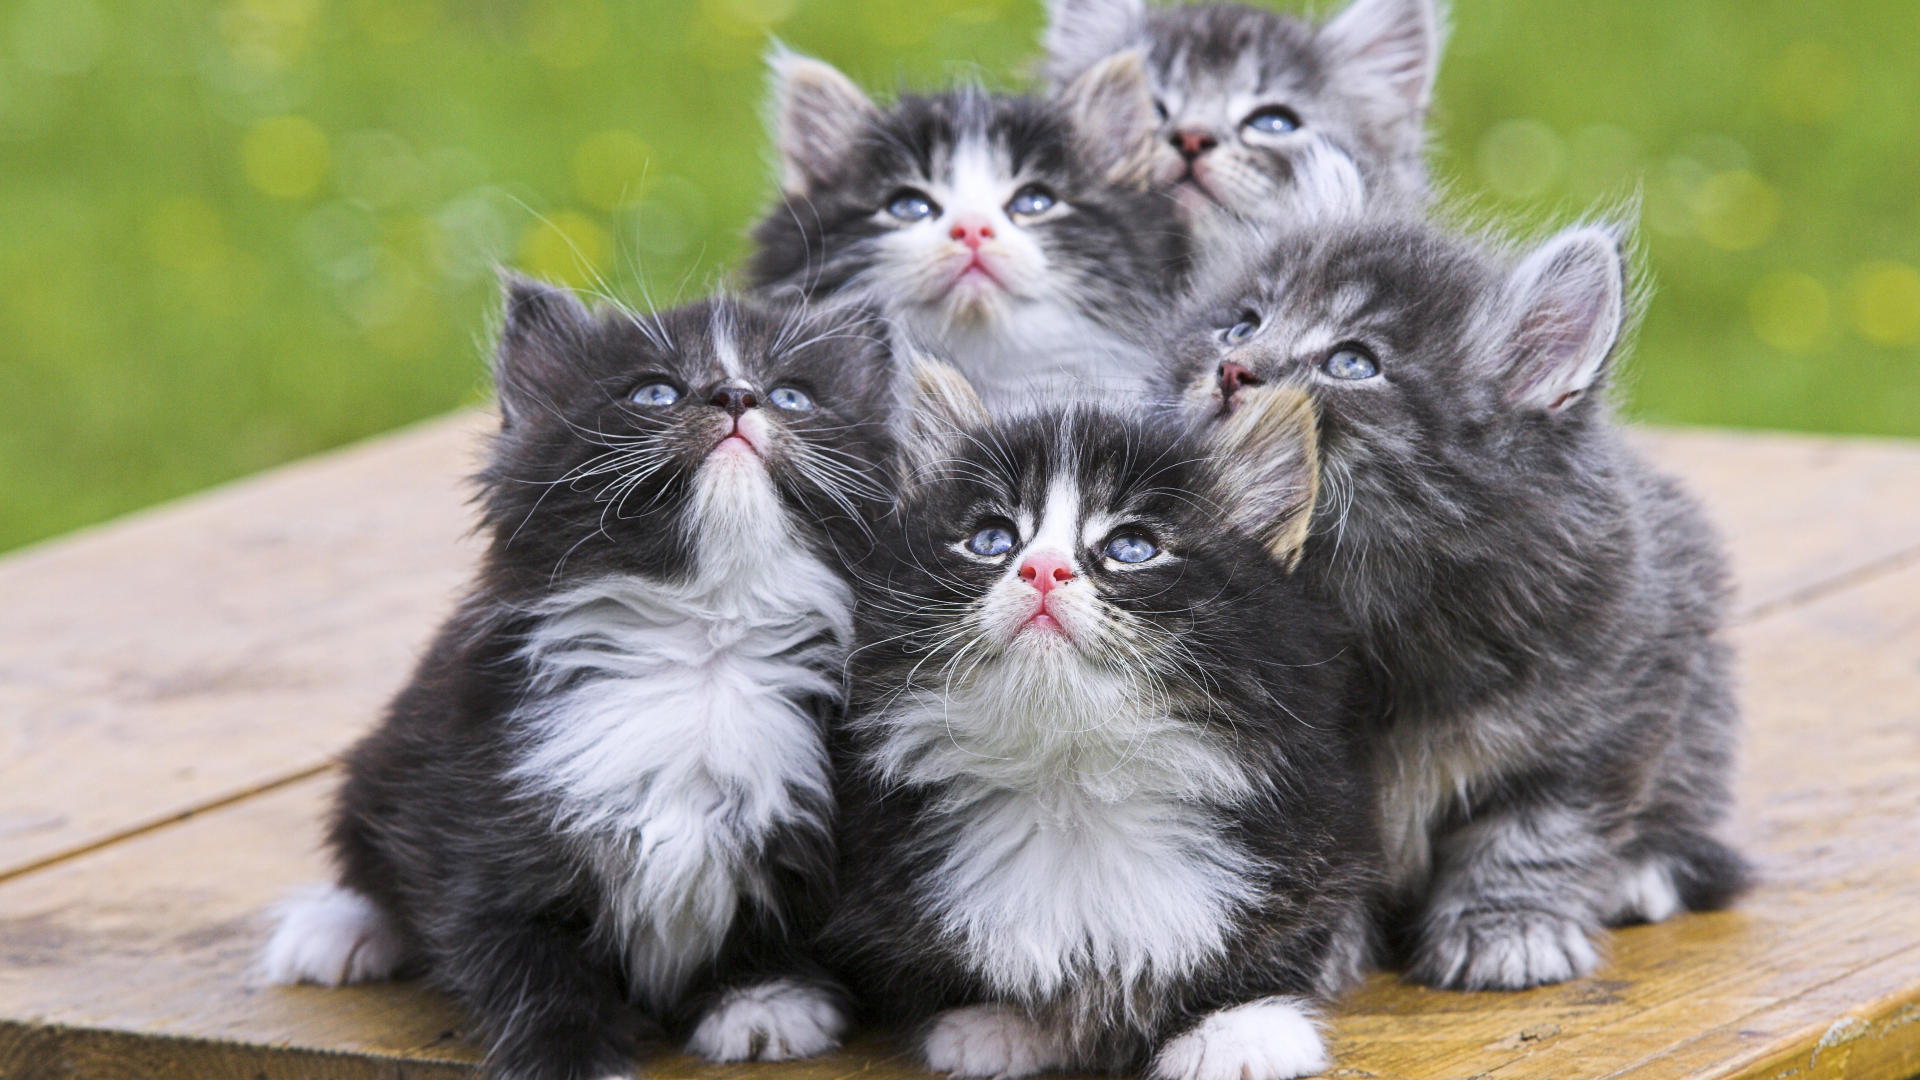 Downloads Persian Kittens HD Wallpaper in high resolution for free